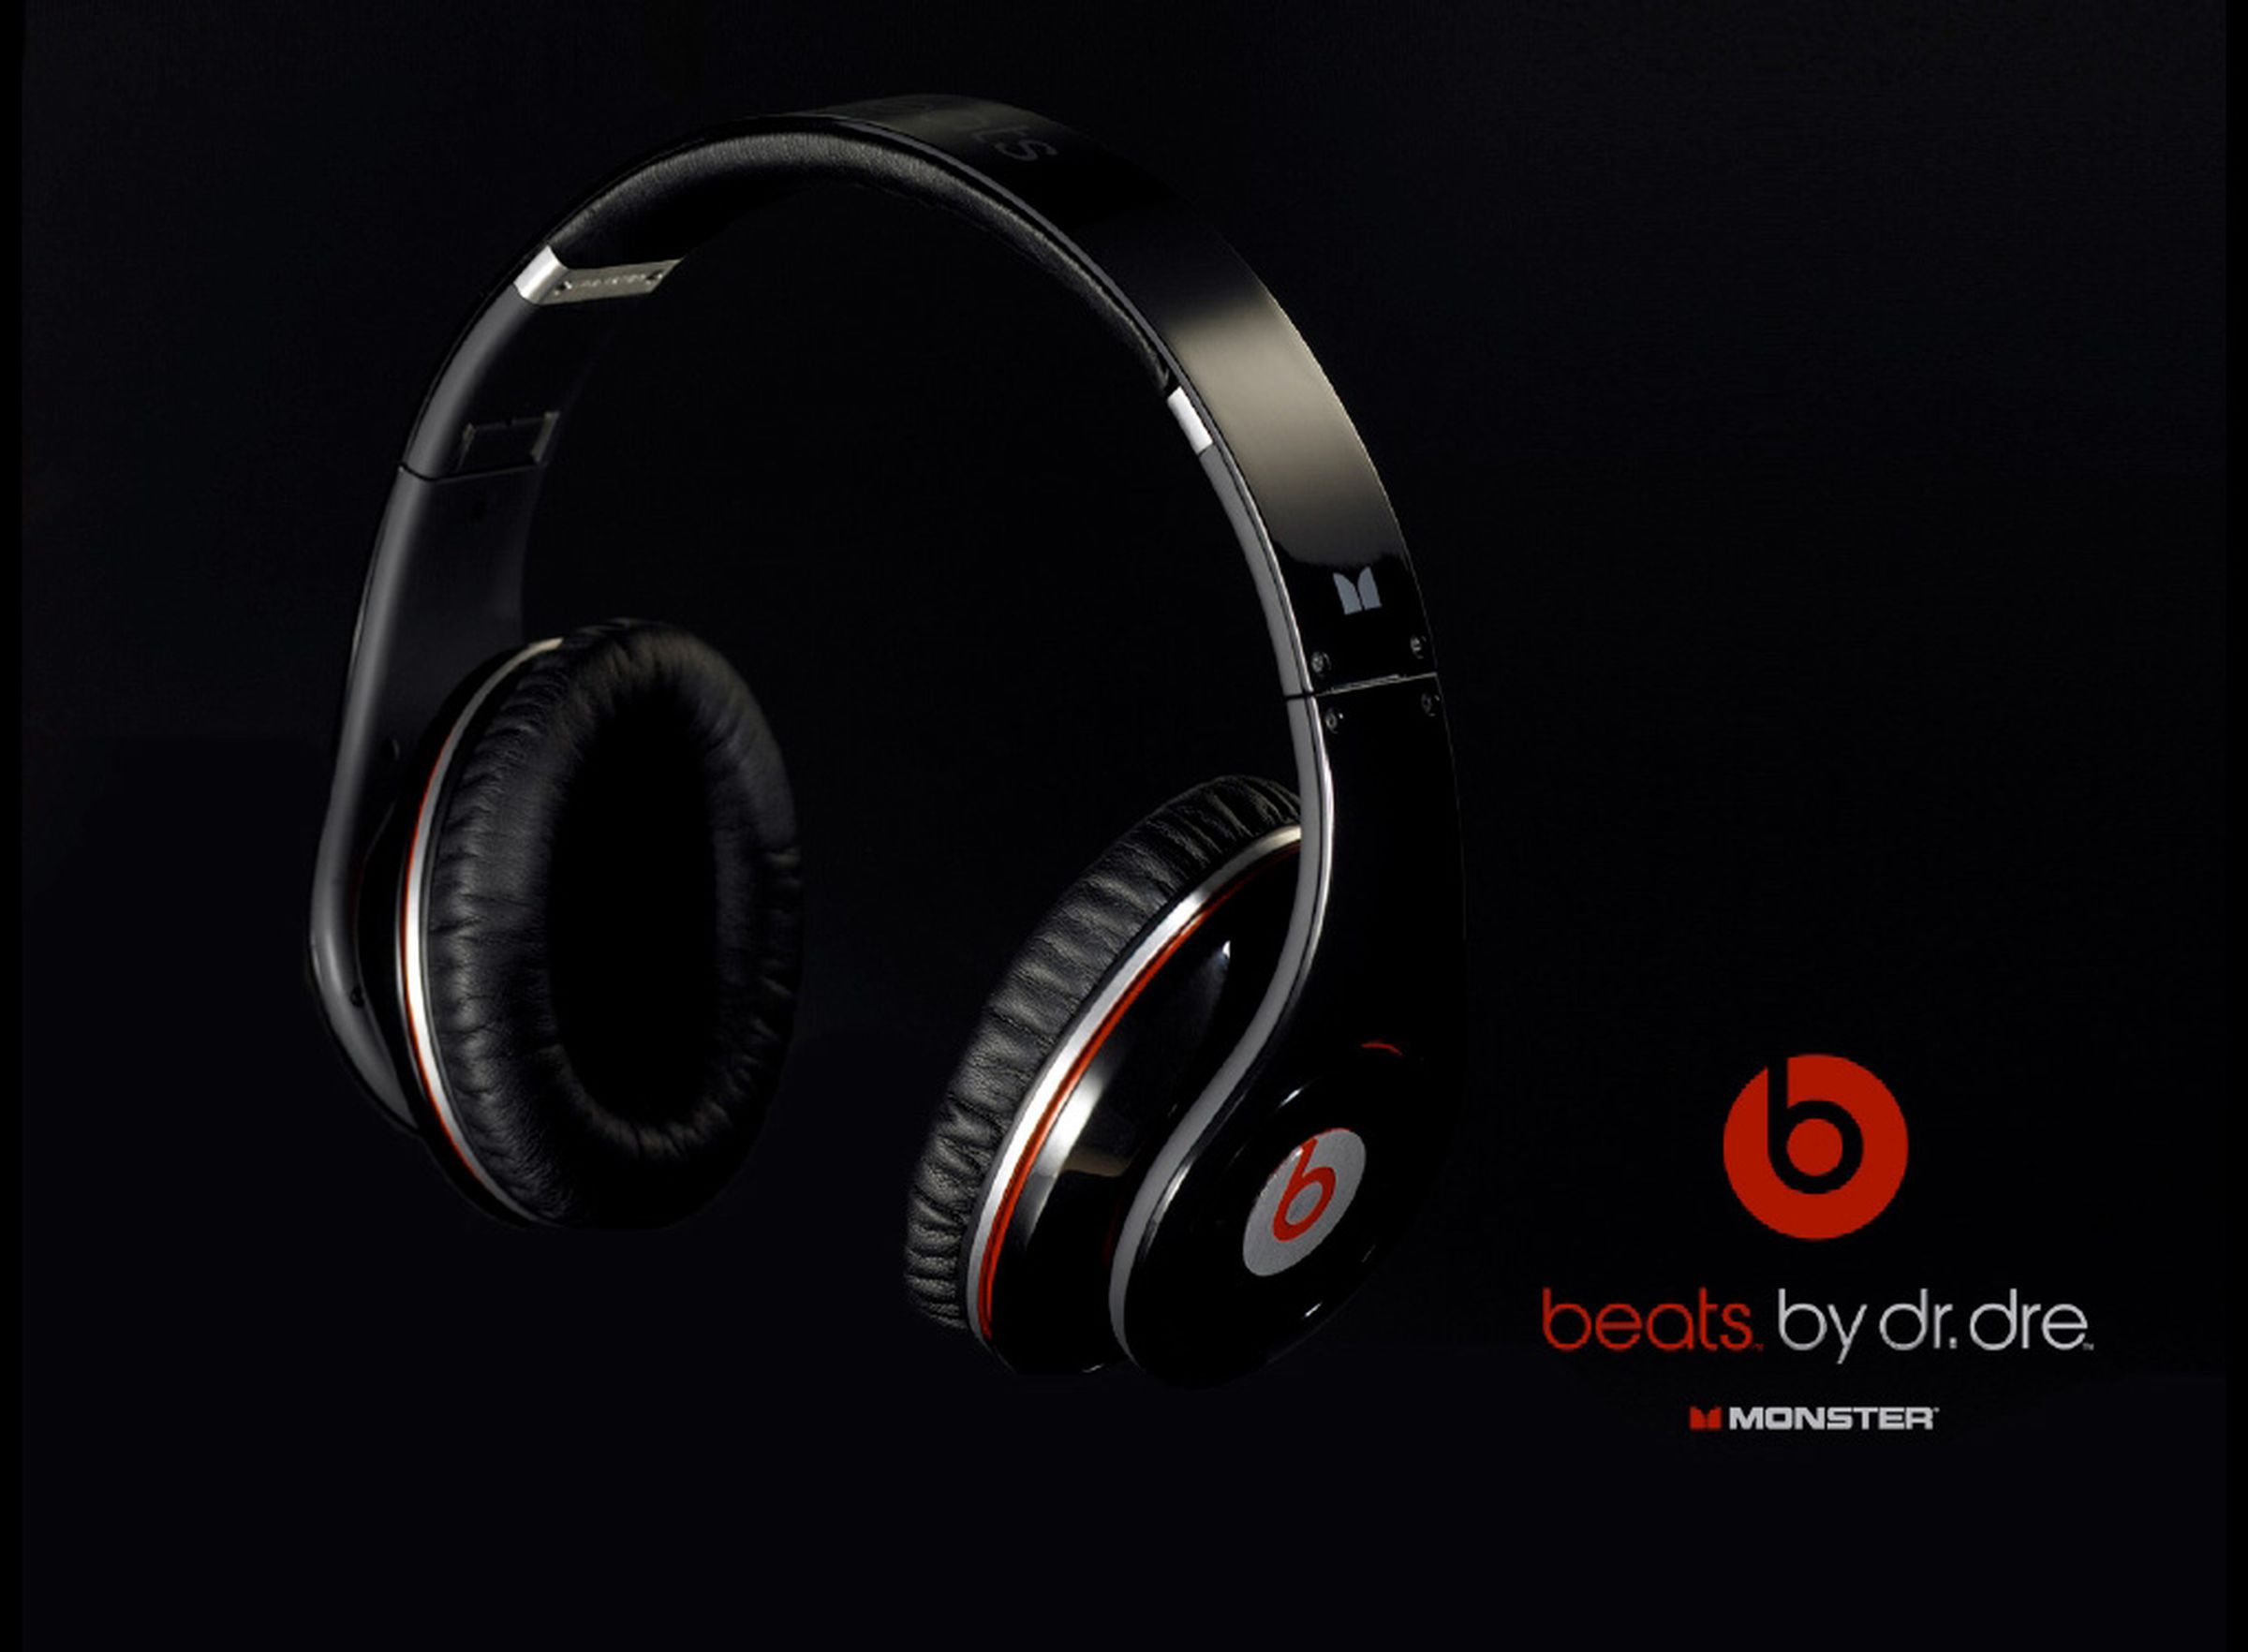 The history of Beats in pictures